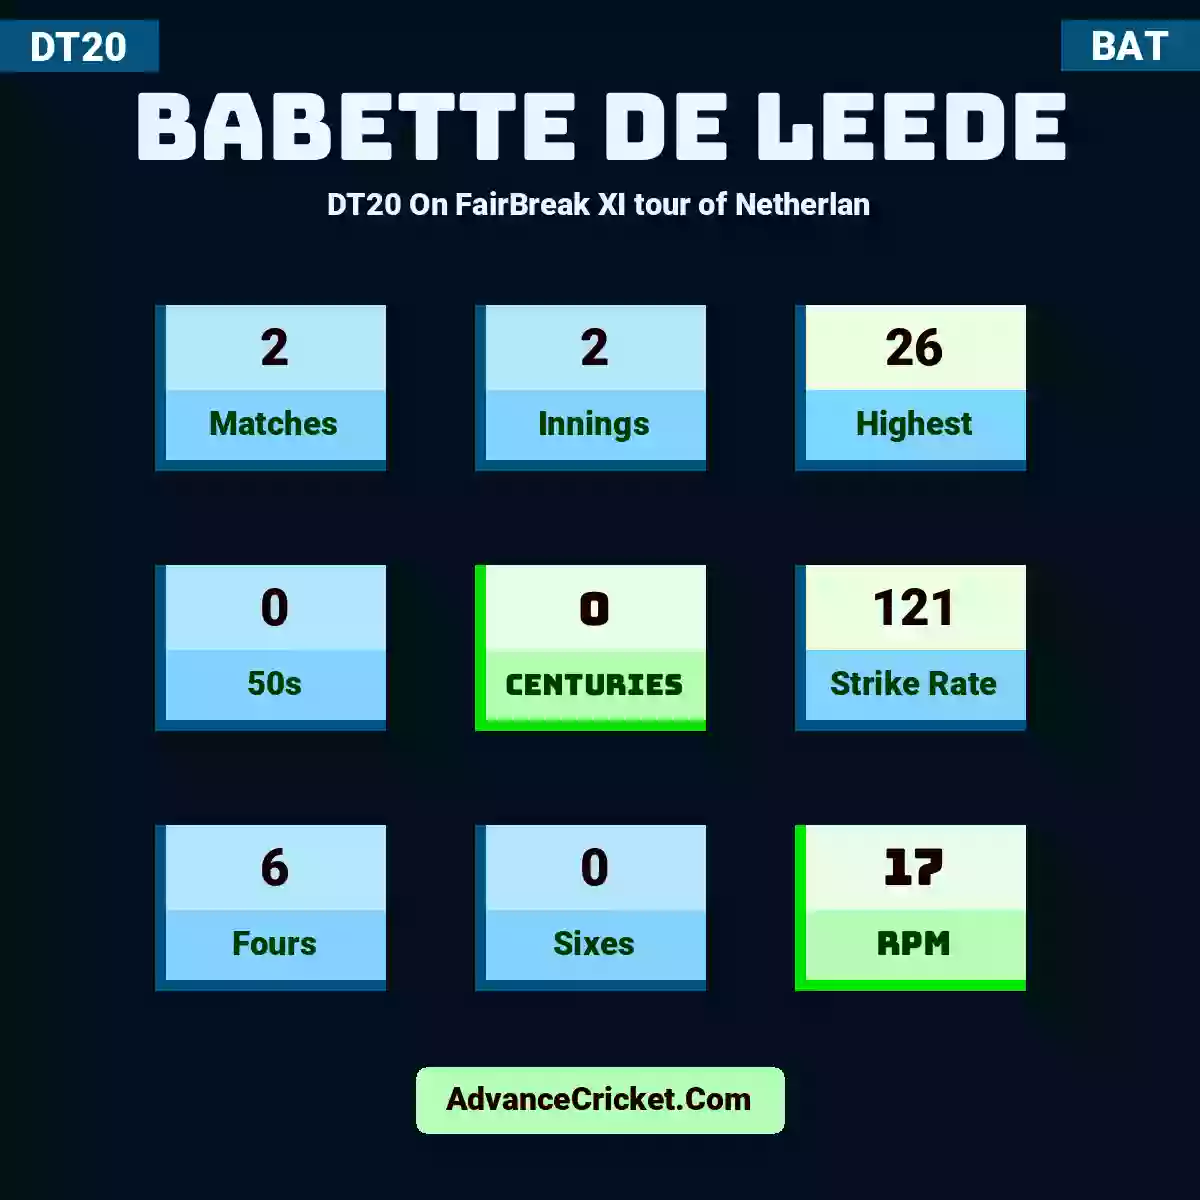 Babette de Leede DT20  On FairBreak XI tour of Netherlan, Babette de Leede played 2 matches, scored 26 runs as highest, 0 half-centuries, and 0 centuries, with a strike rate of 121. B.Leede hit 6 fours and 0 sixes, with an RPM of 17.